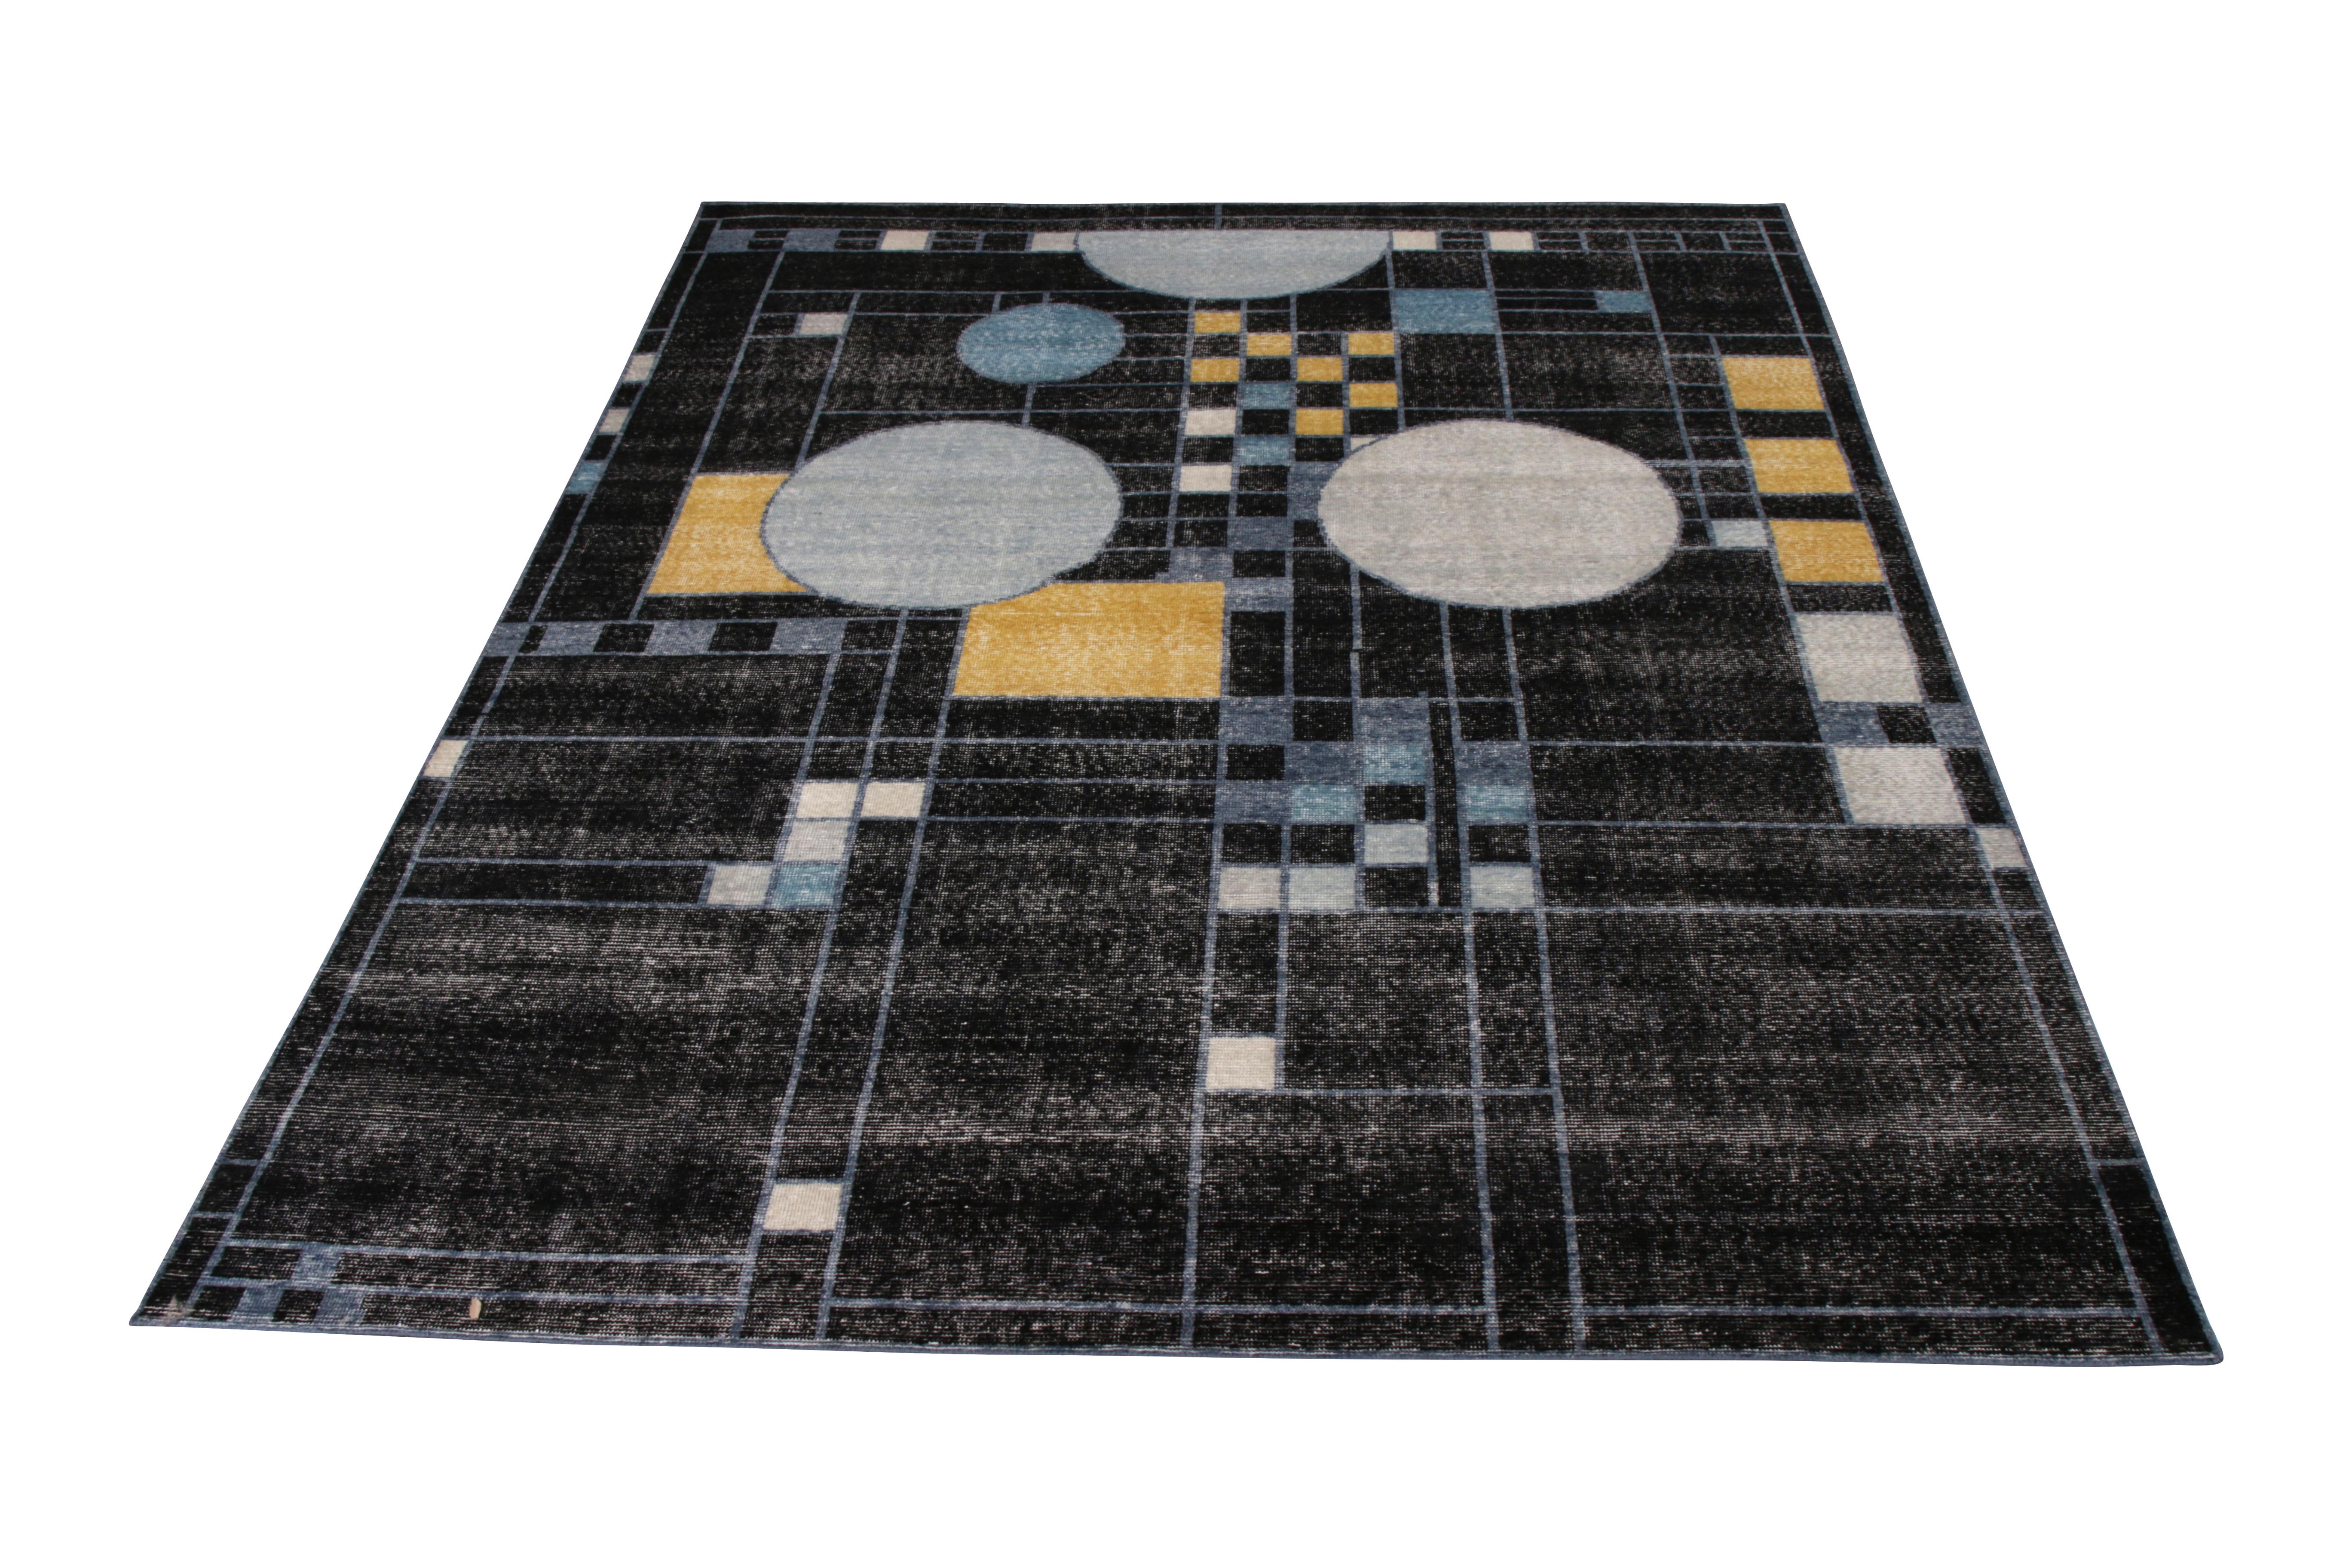 Handmade in a refined, low-pile wool with a comfortable wash achieving this shabby-chic distressed style, this 8 x 10 modern rug joins the Homage collection by Rug & Kilim, representing an encyclopedic approach to reimagining Classic and modern rug